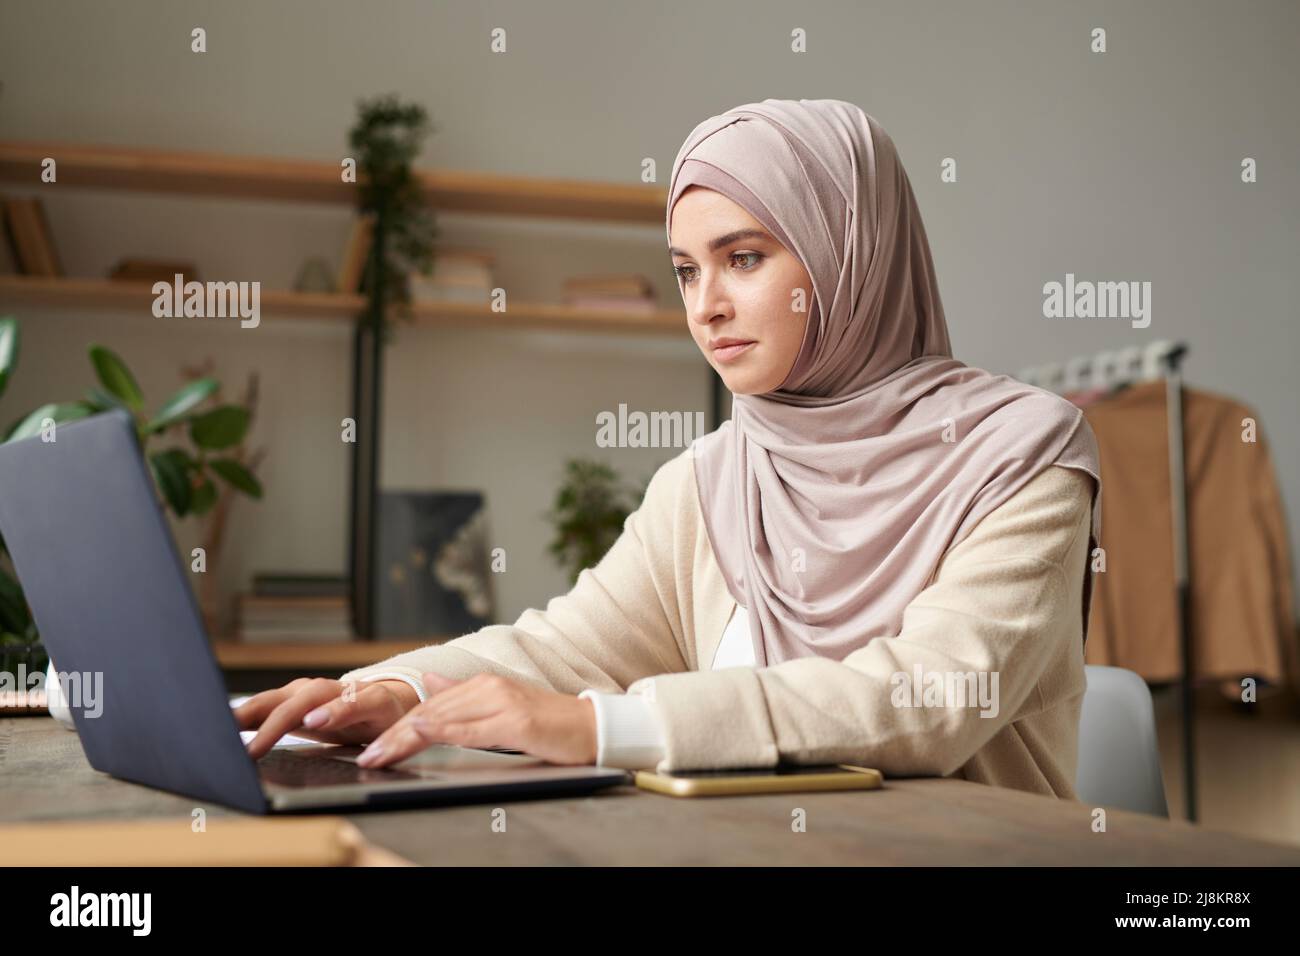 Horizontal portrait of attractive Middle Eastern woman wearing hijab spending time in modern office room working on laptop Stock Photo